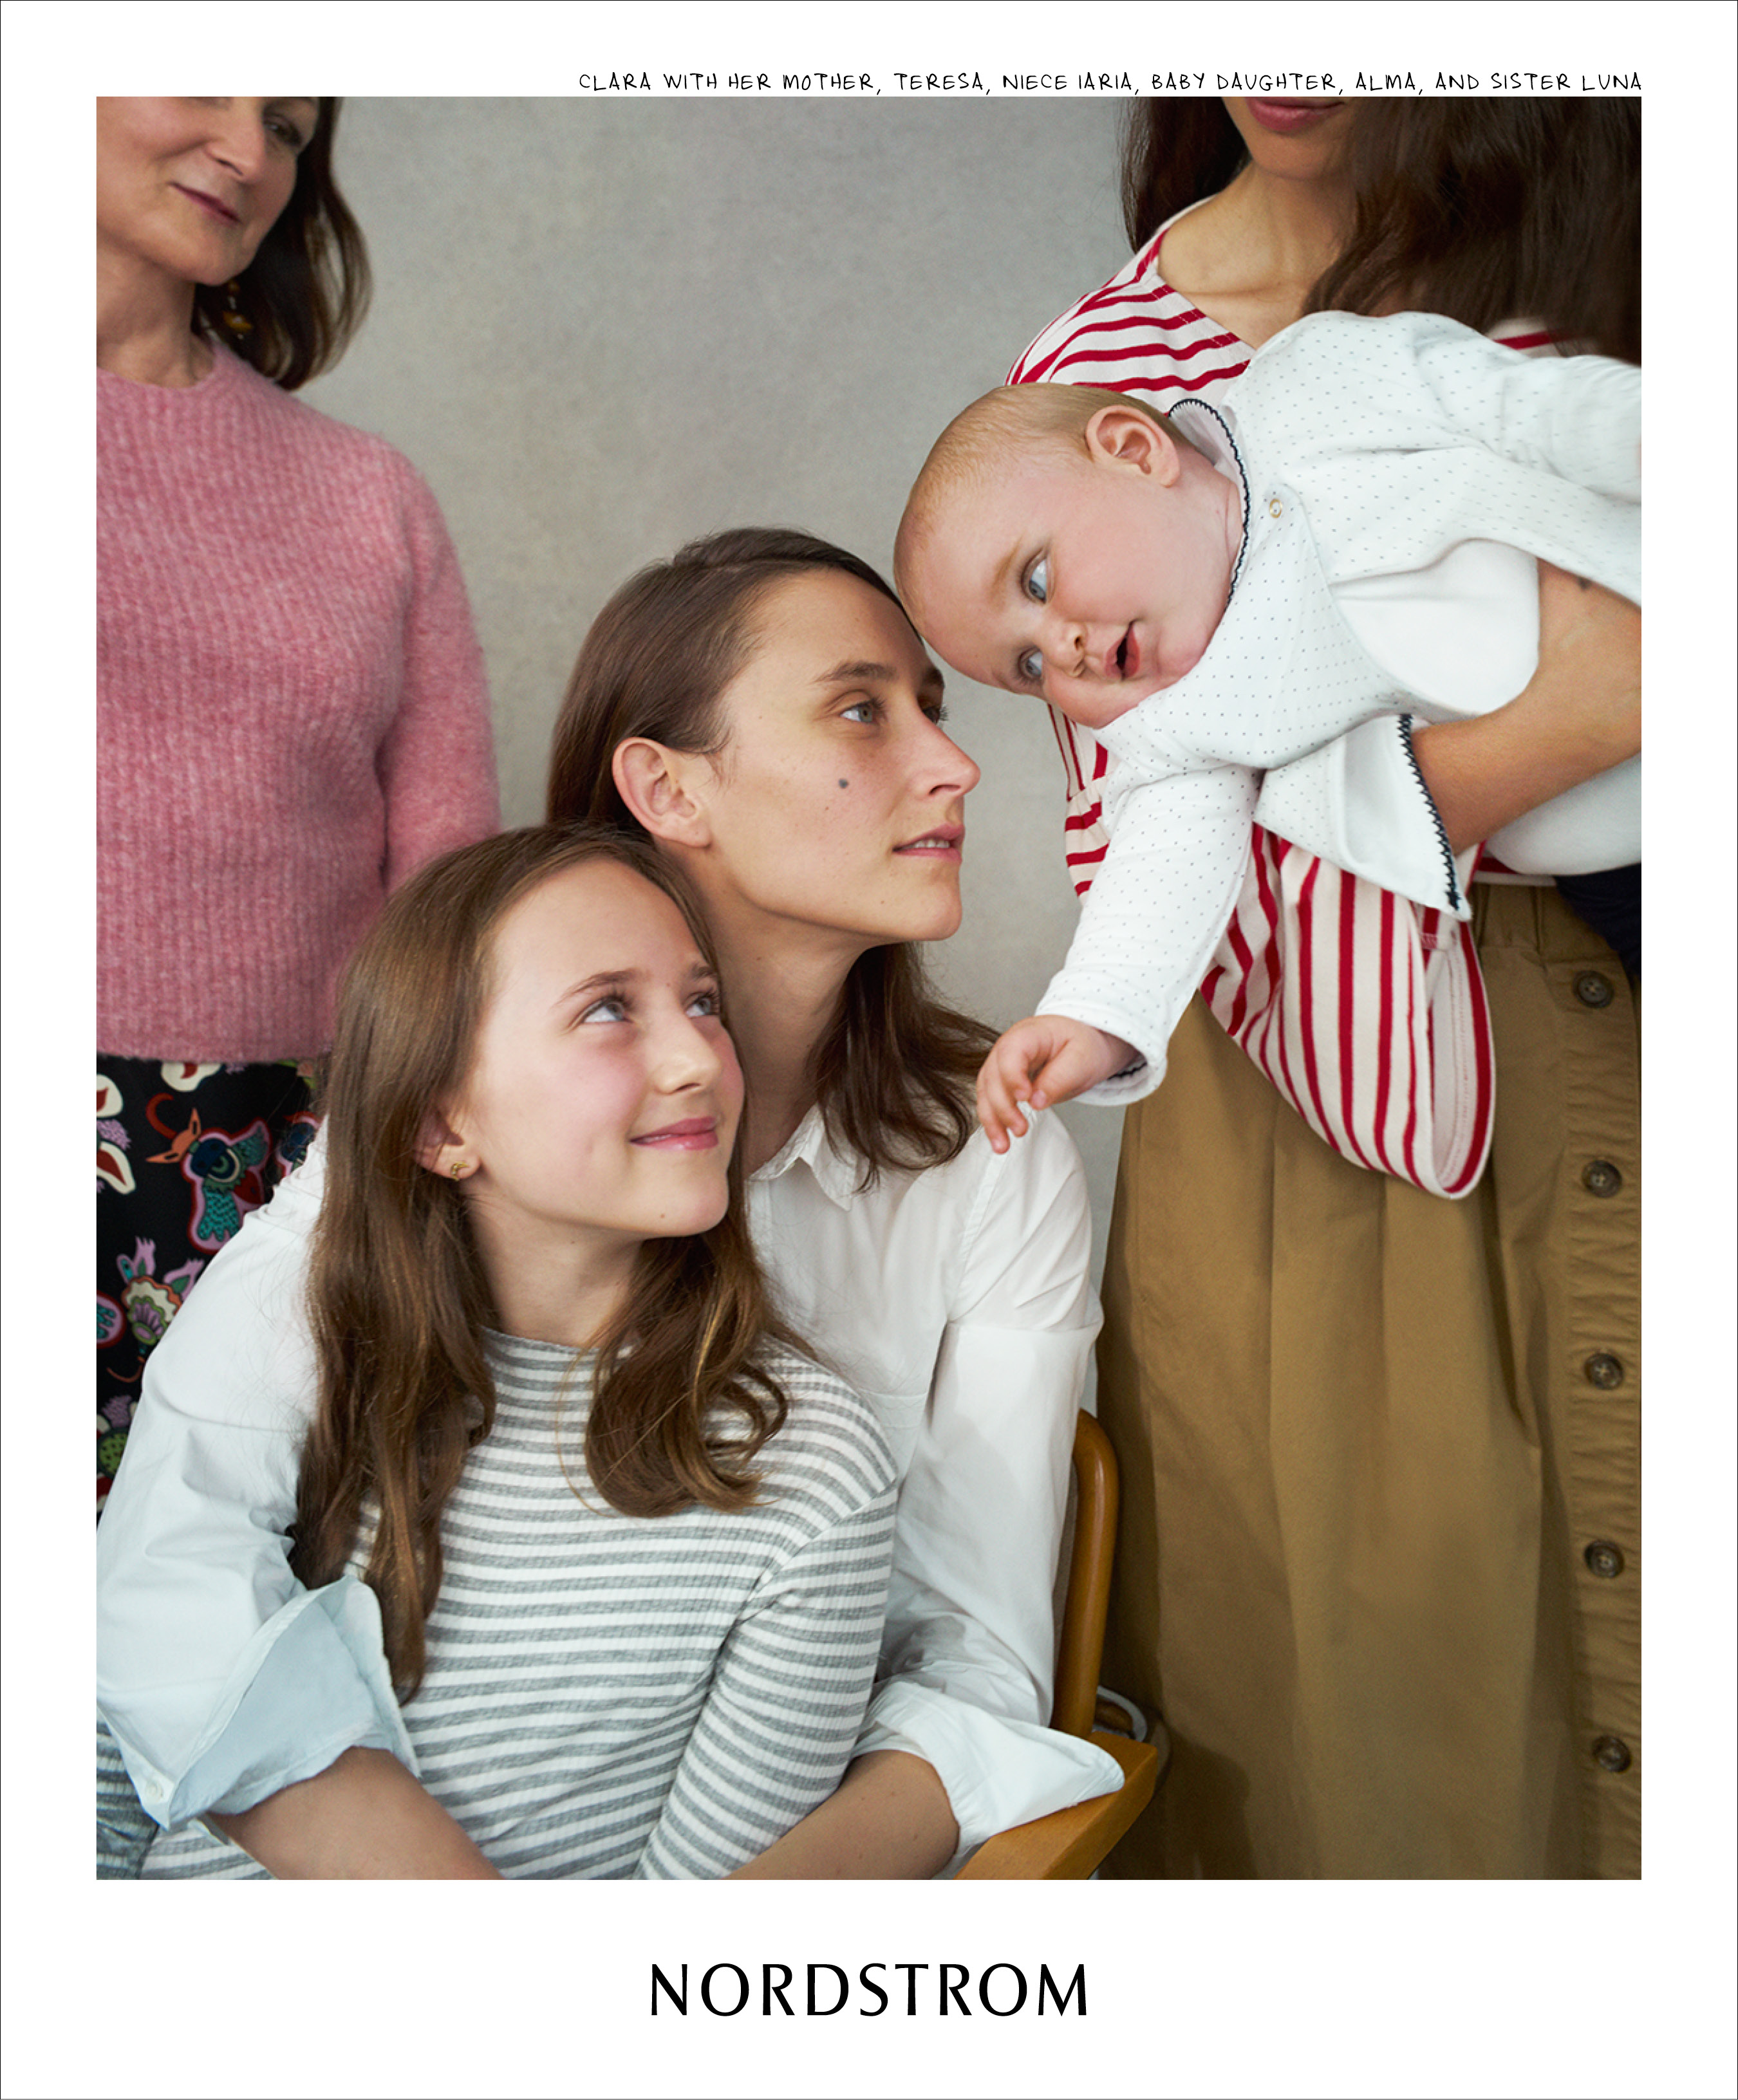 Nordstrom Fall Campaign - Clara Cullen with her mother, daughter, sister + niece